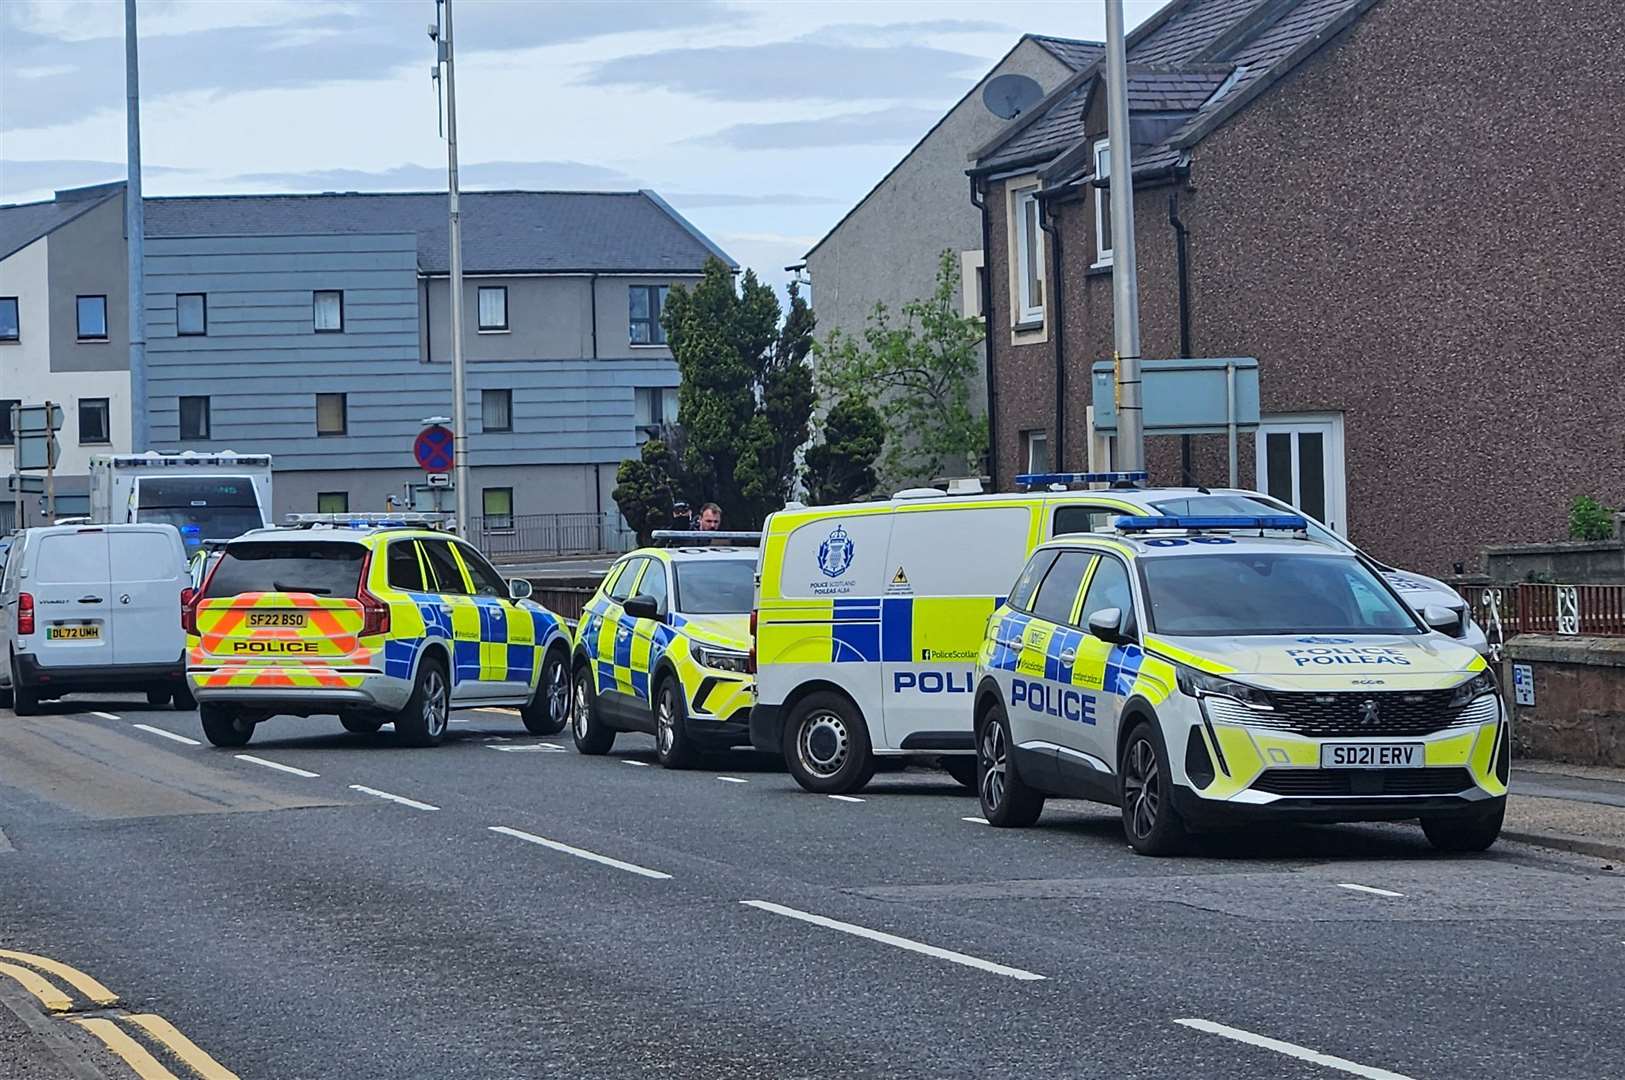 A heavy police presence could be seen in Kenneth Street, part of which was closed to traffic.